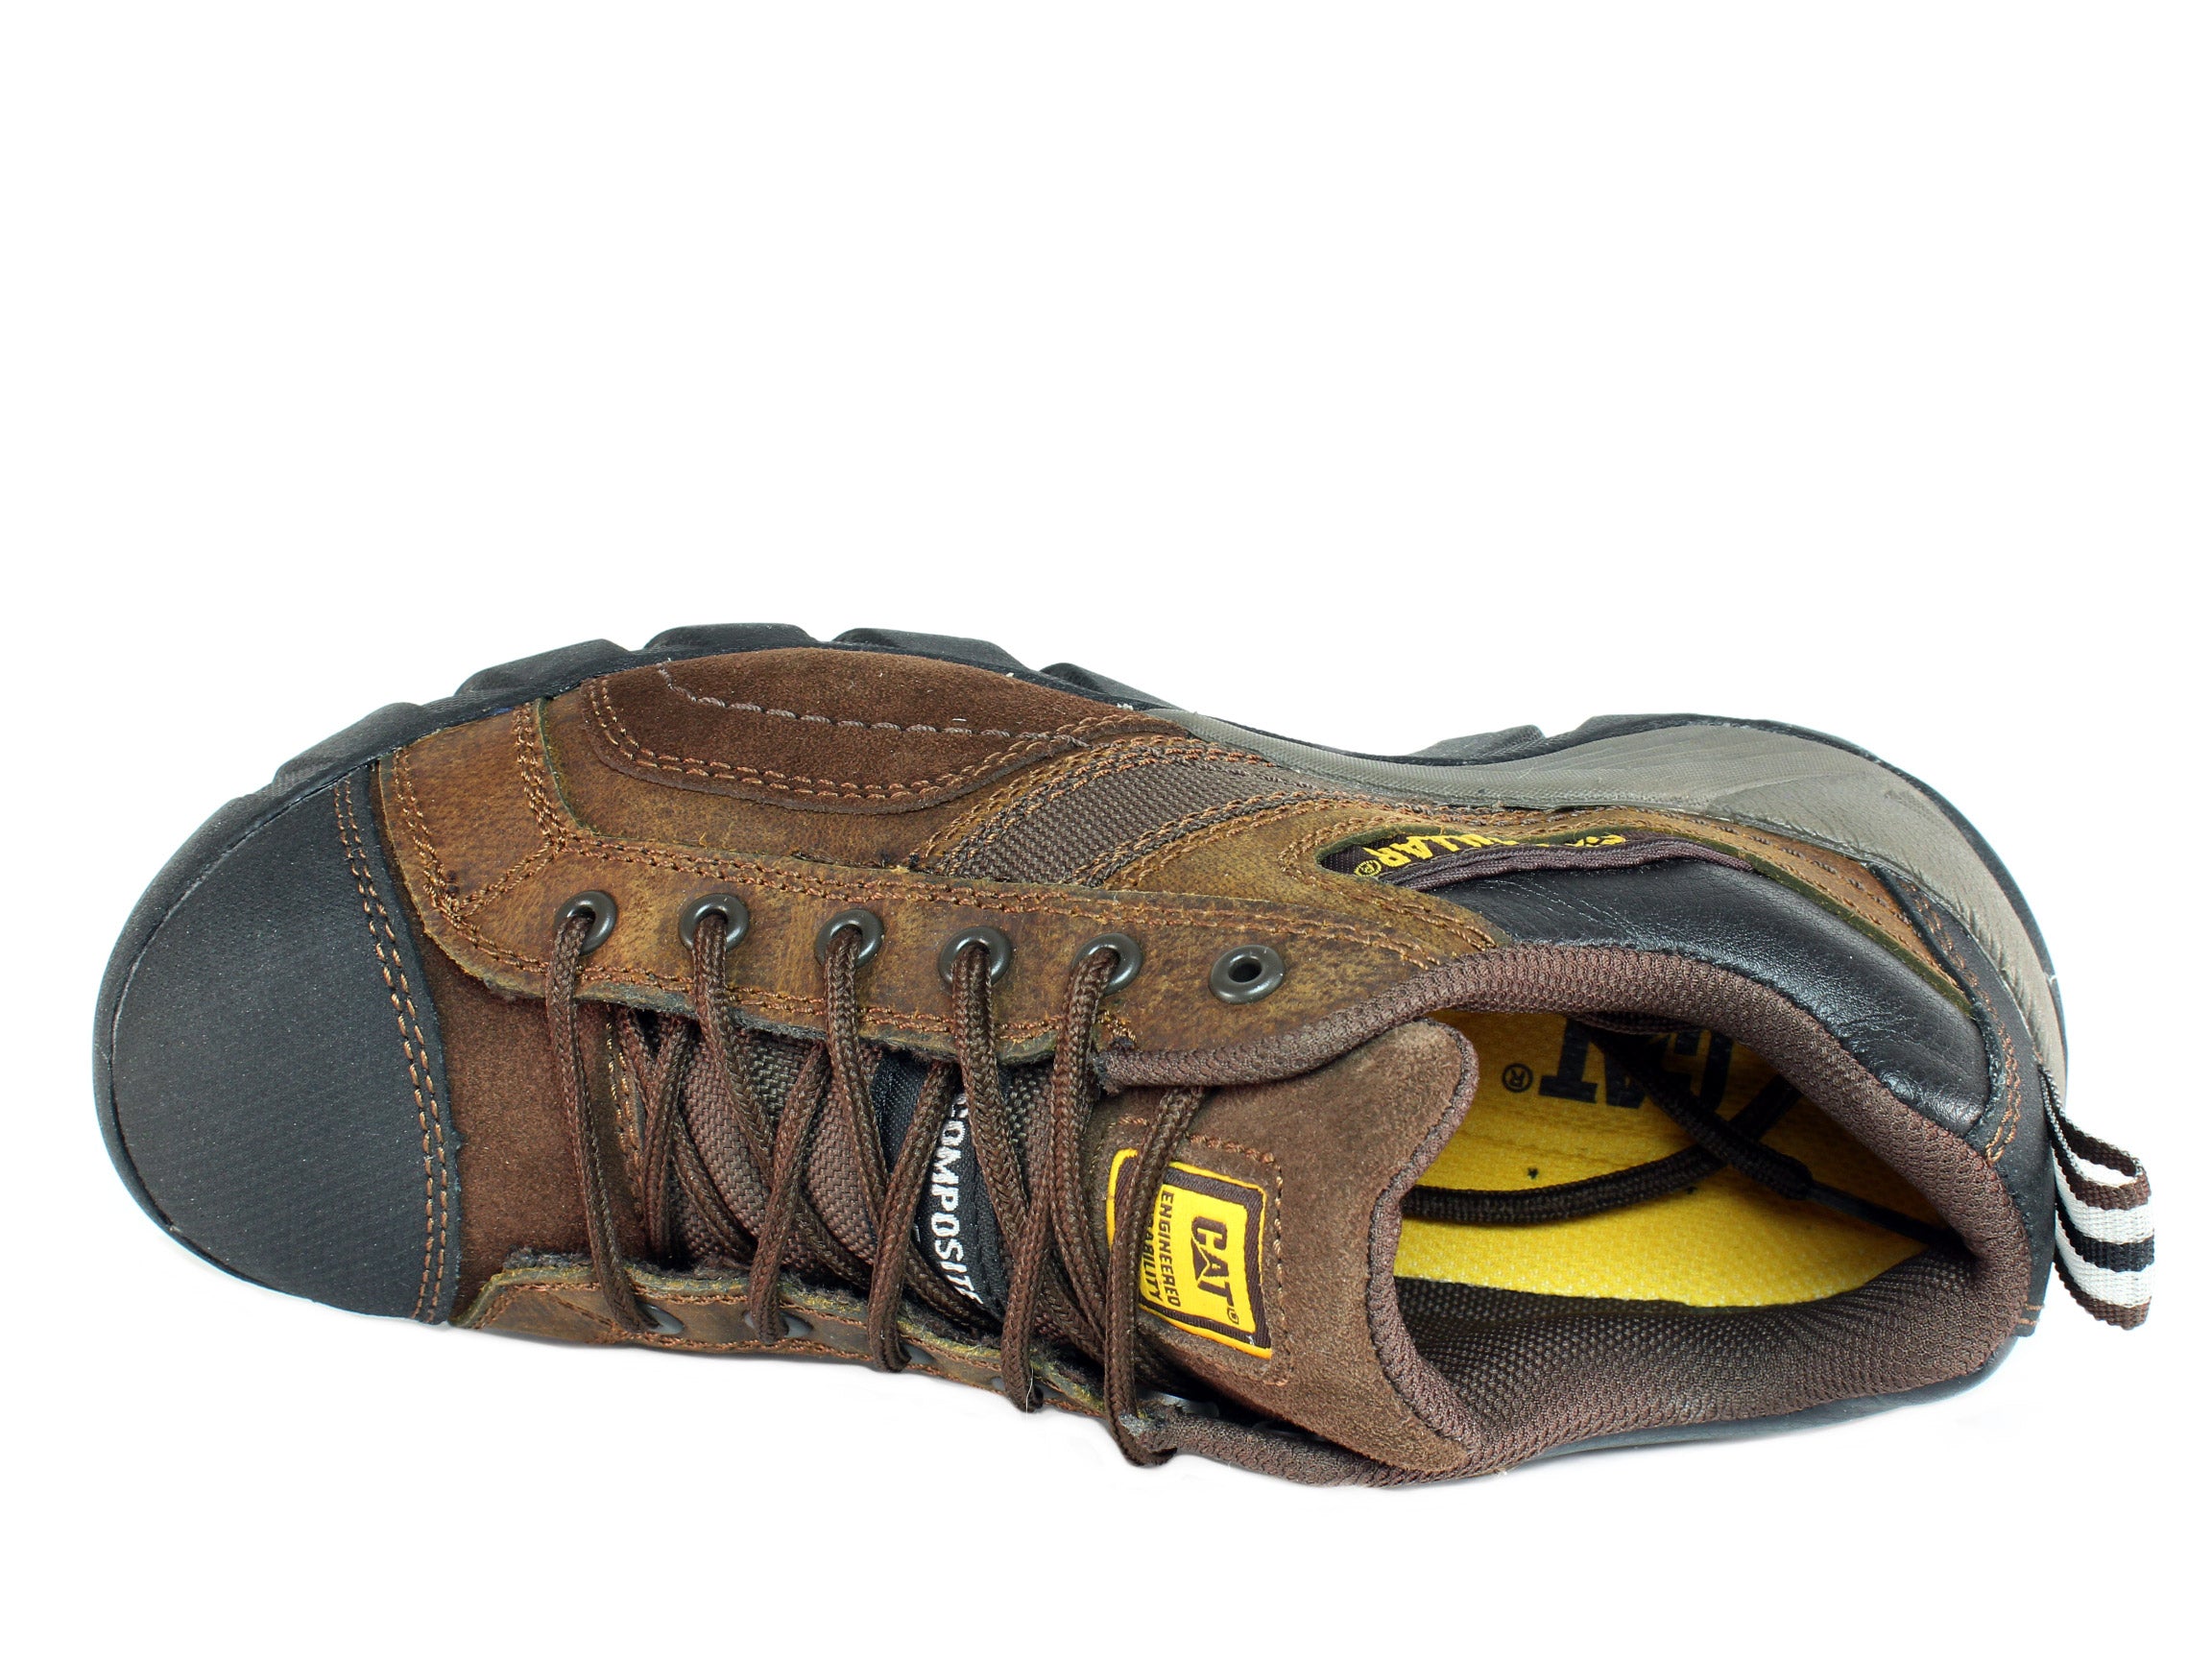 caterpillar safety shoes womens